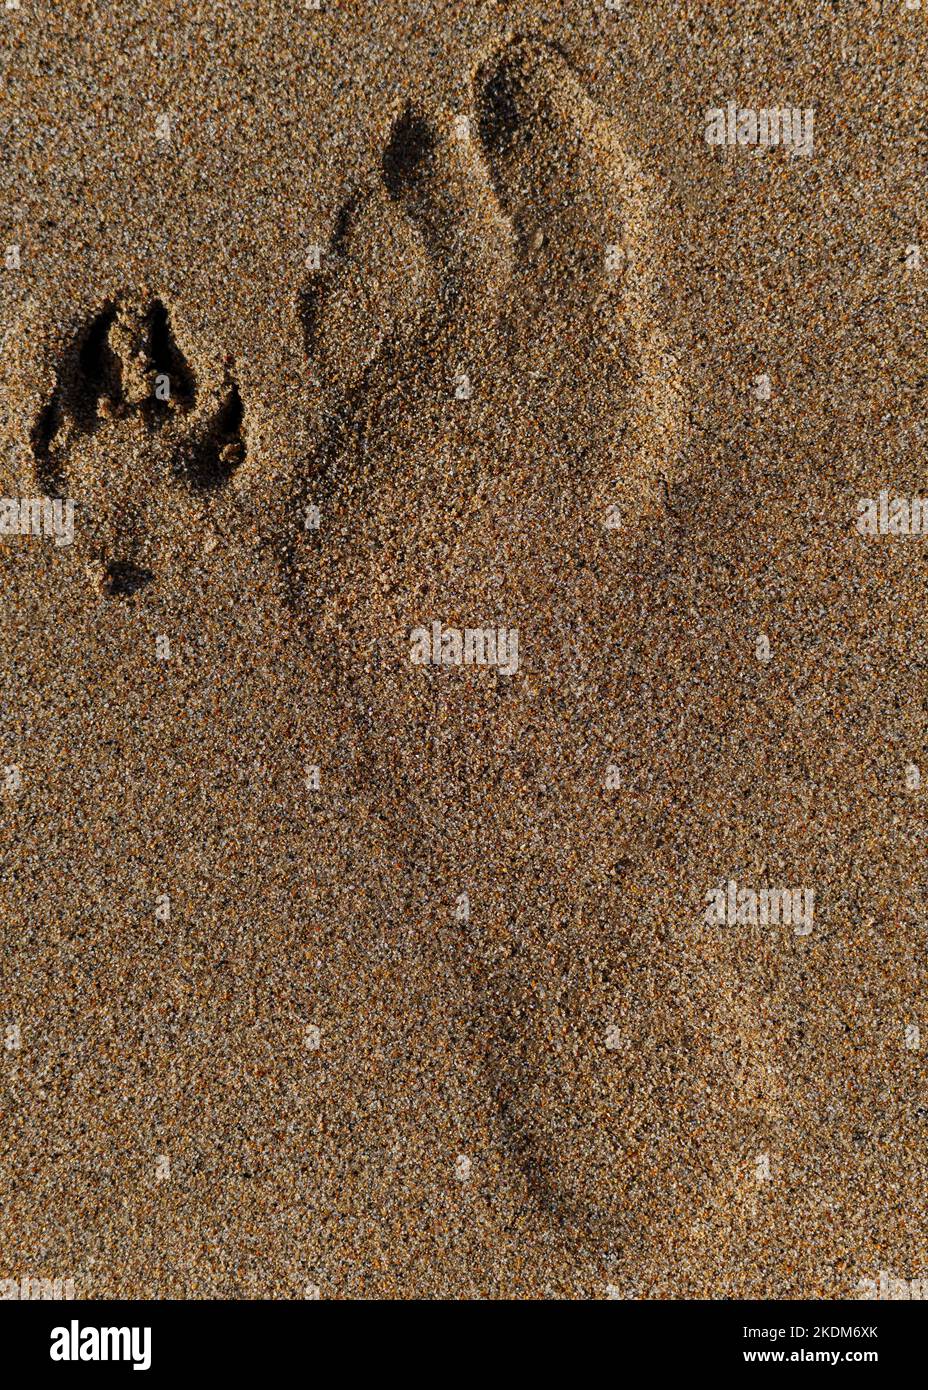 Human (barefoot) and dog foot prints in one photo. Foot prints in the sand. Stock Photo